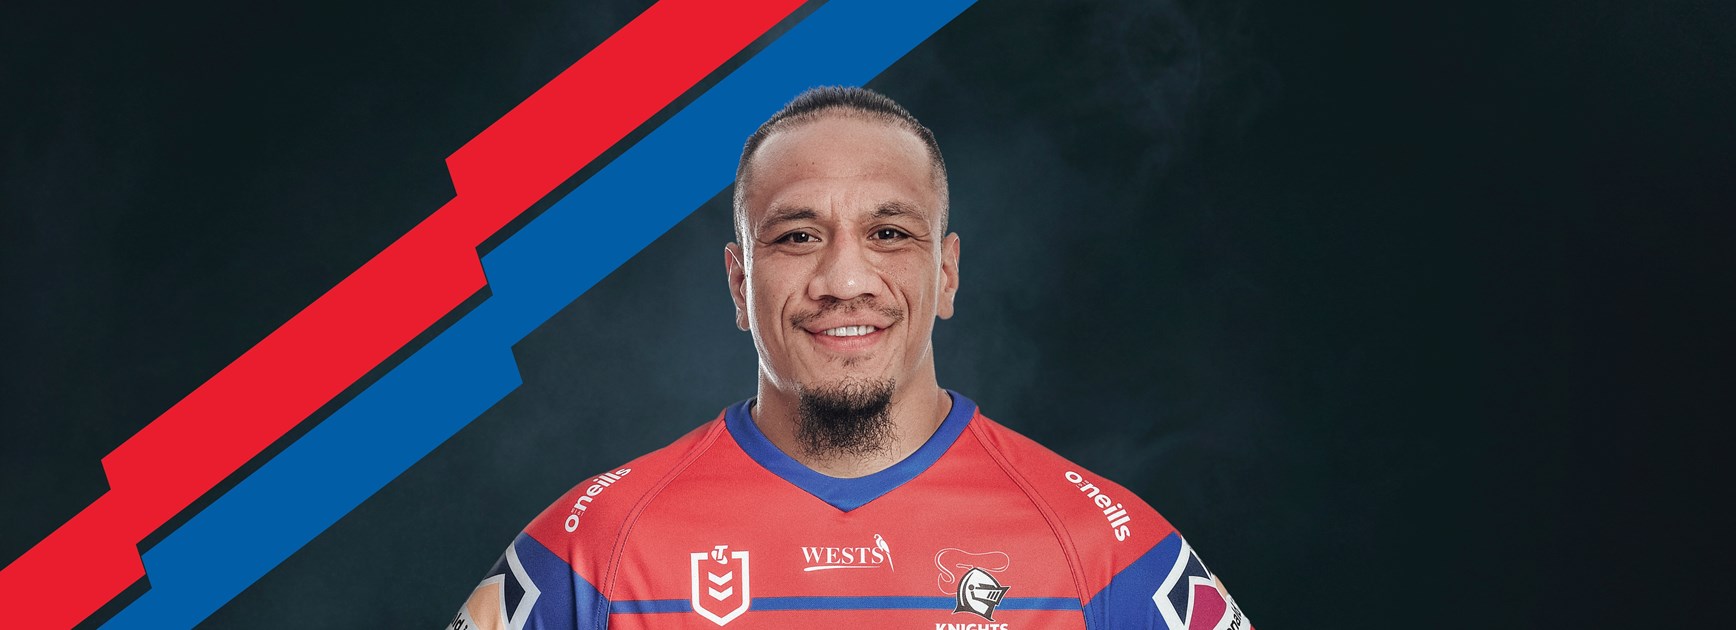 Sauaso Sue signs with the Knights